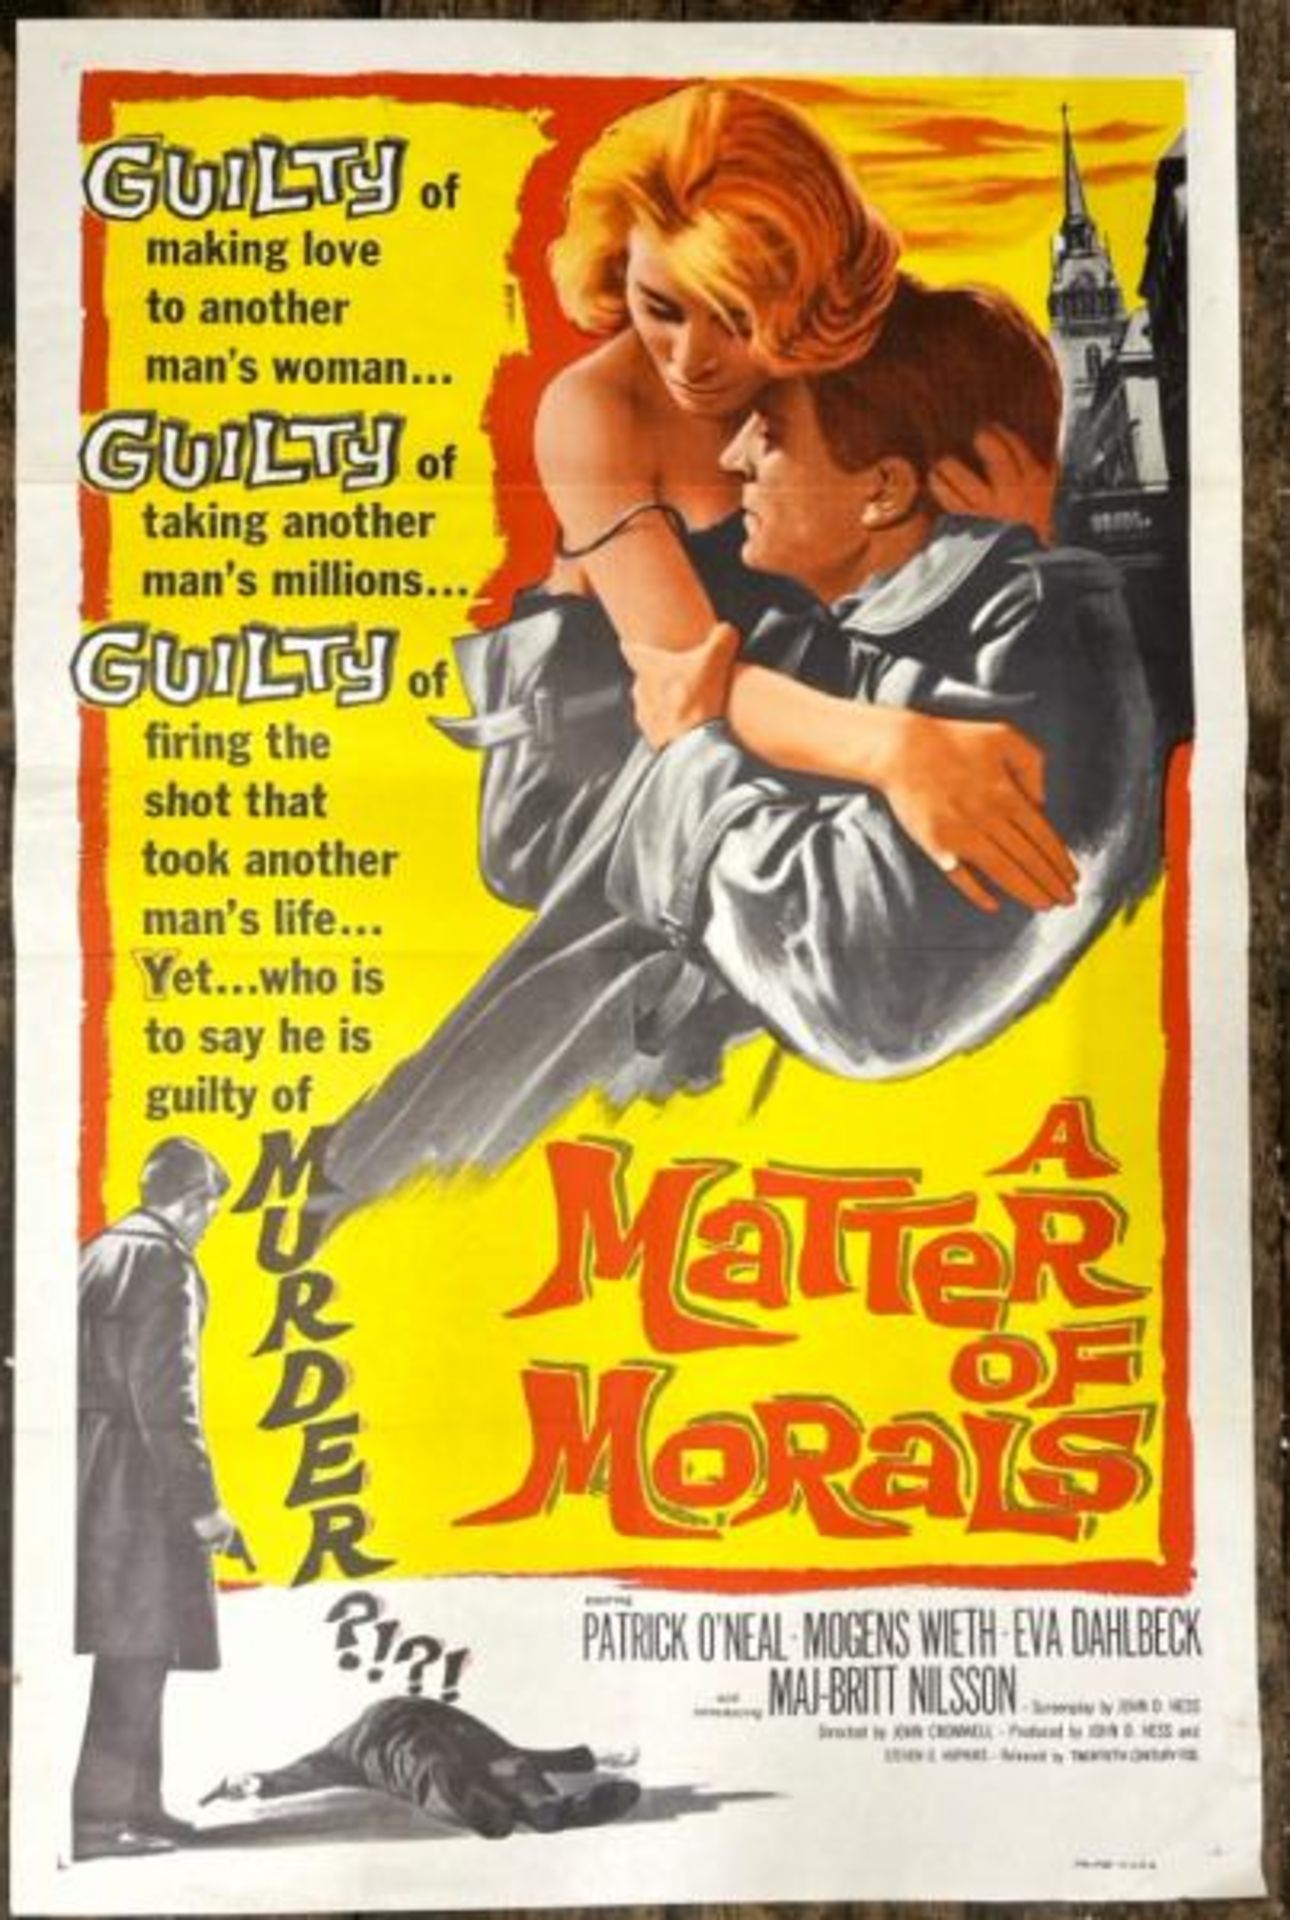 A MATTER OF MORALS, ORIGINAL FILM POSTER, PRINTED IN THE USA, 68.5CM W X 104.5CM H